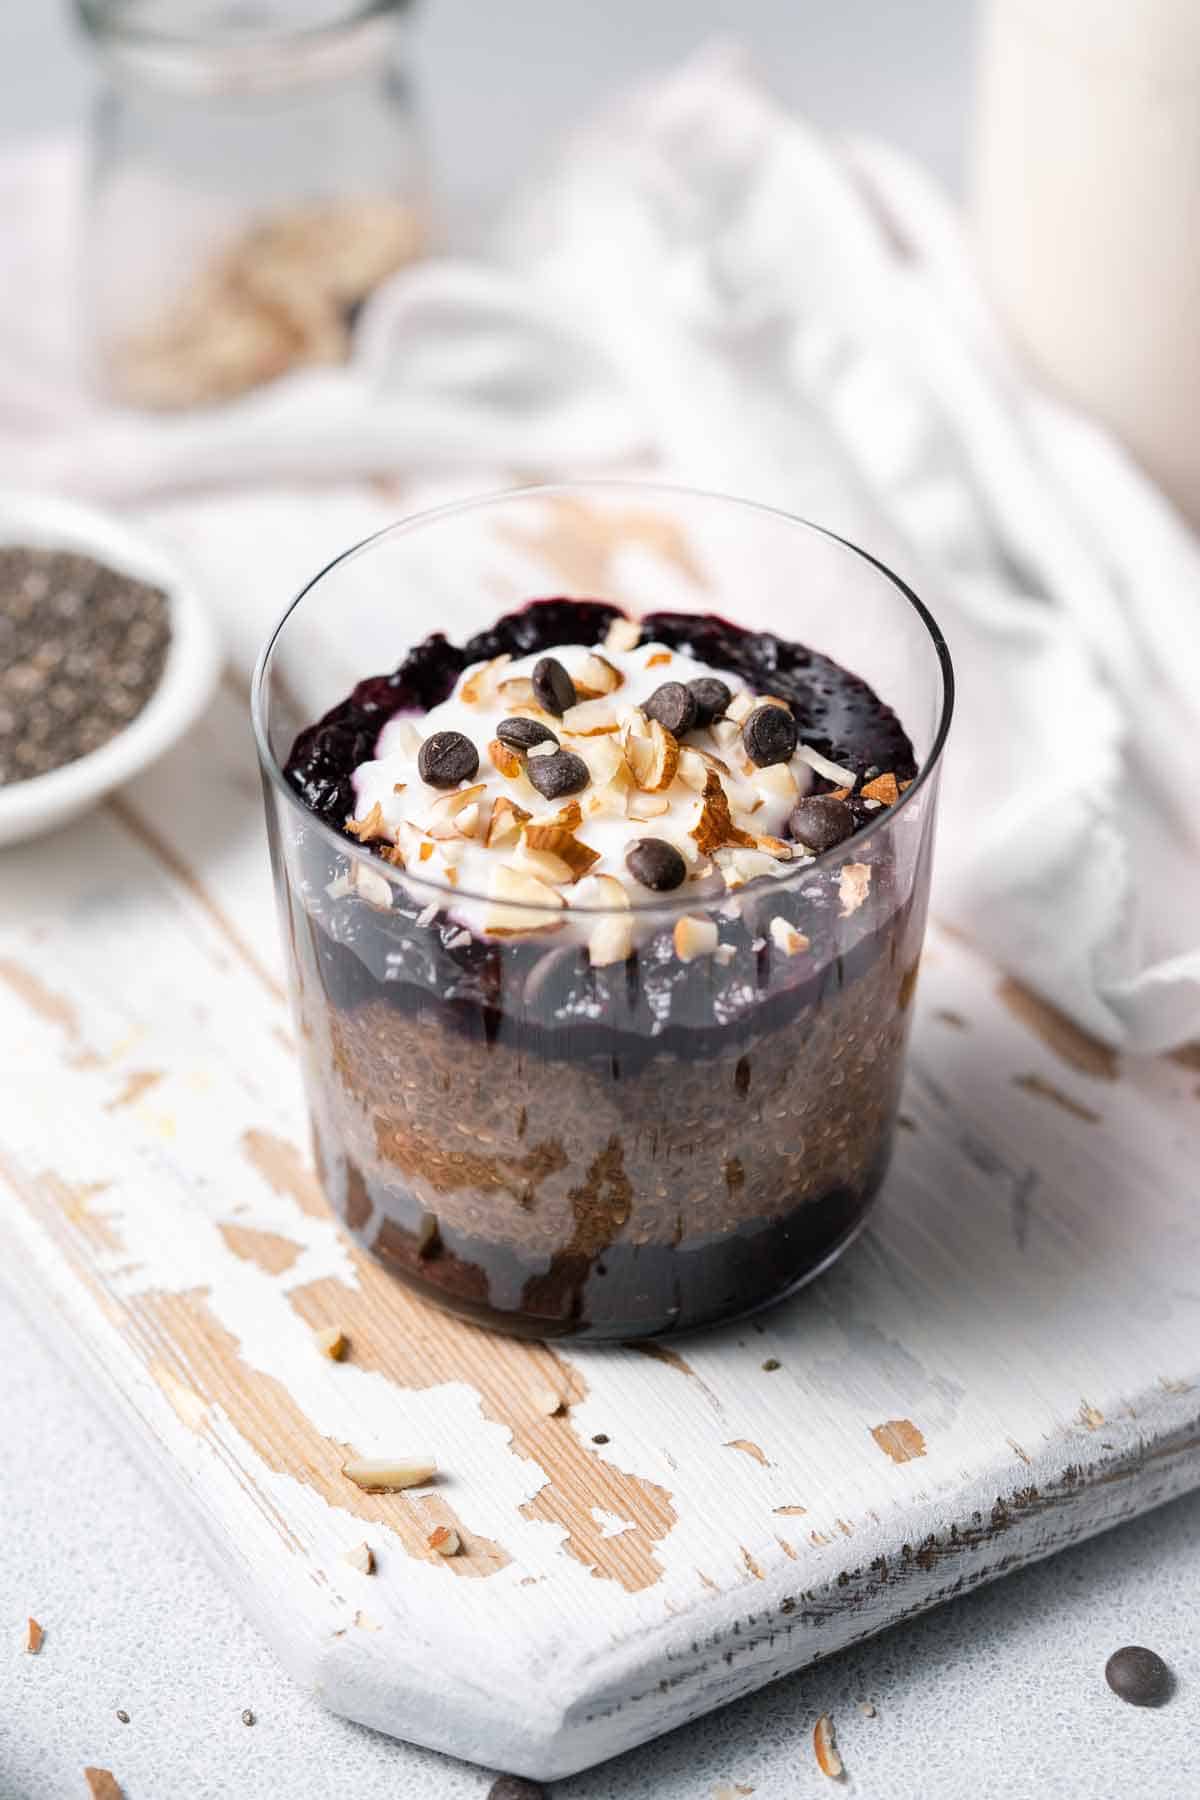 An angled view of a glass of chocolate blueberry chia pudding topped with yogurt and chocolate chips.